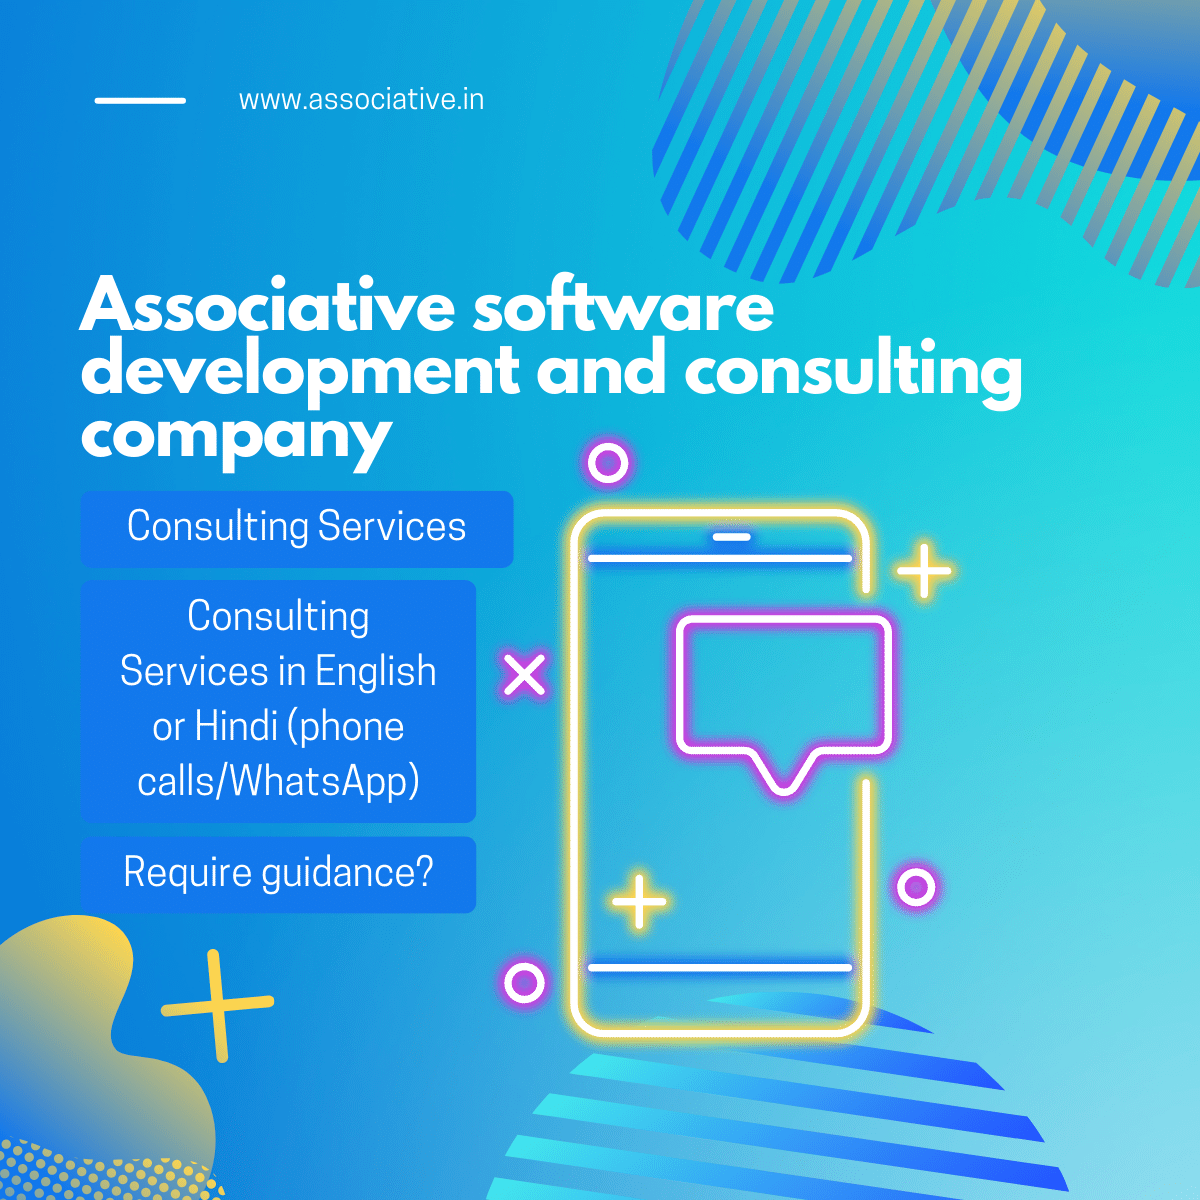 Associative software development and consulting company